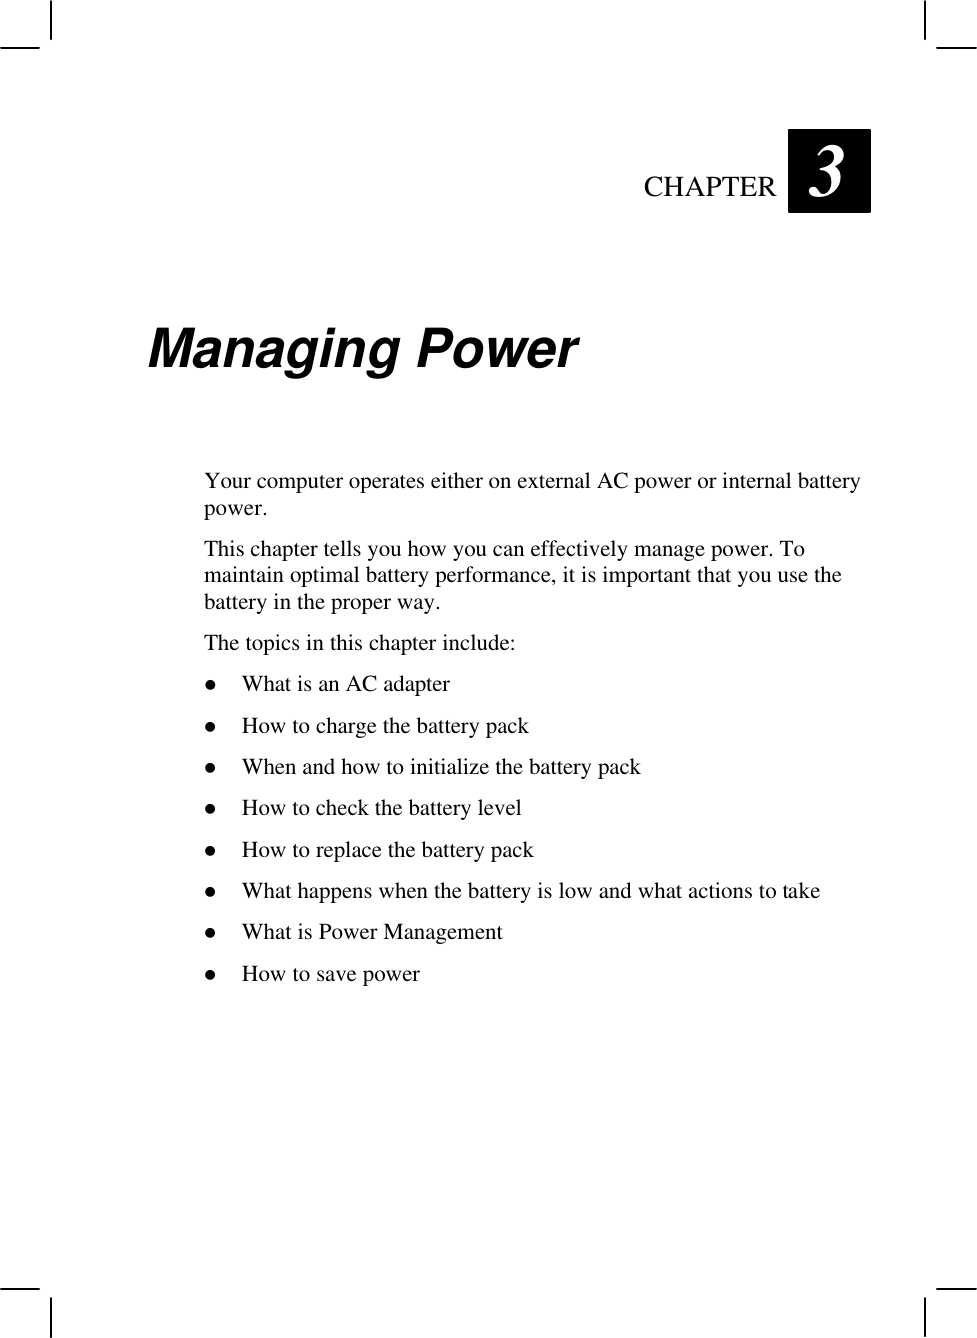   CHAPTER 3 Managing Power Your computer operates either on external AC power or internal battery power. This chapter tells you how you can effectively manage power. To maintain optimal battery performance, it is important that you use the battery in the proper way. The topics in this chapter include: l What is an AC adapter l How to charge the battery pack l When and how to initialize the battery pack l How to check the battery level l How to replace the battery pack l What happens when the battery is low and what actions to take l What is Power Management l How to save power 